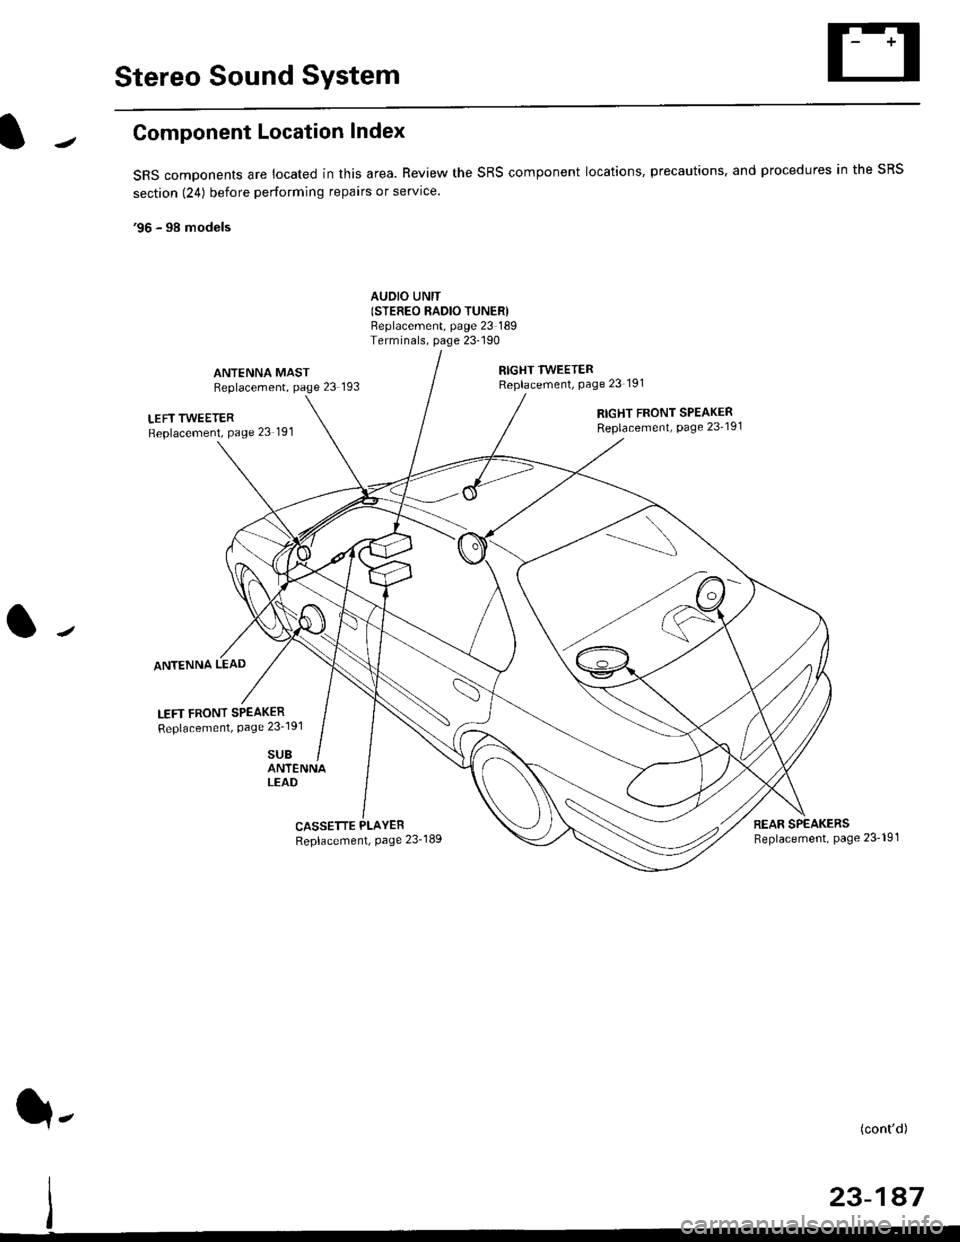 HONDA CIVIC 1996 6.G User Guide Stereo Sound System
Component Location Index
SRS components are located in this area. Review the SRS component locations, precautions. and procedures in the SRS
section (24) before performing repairs 